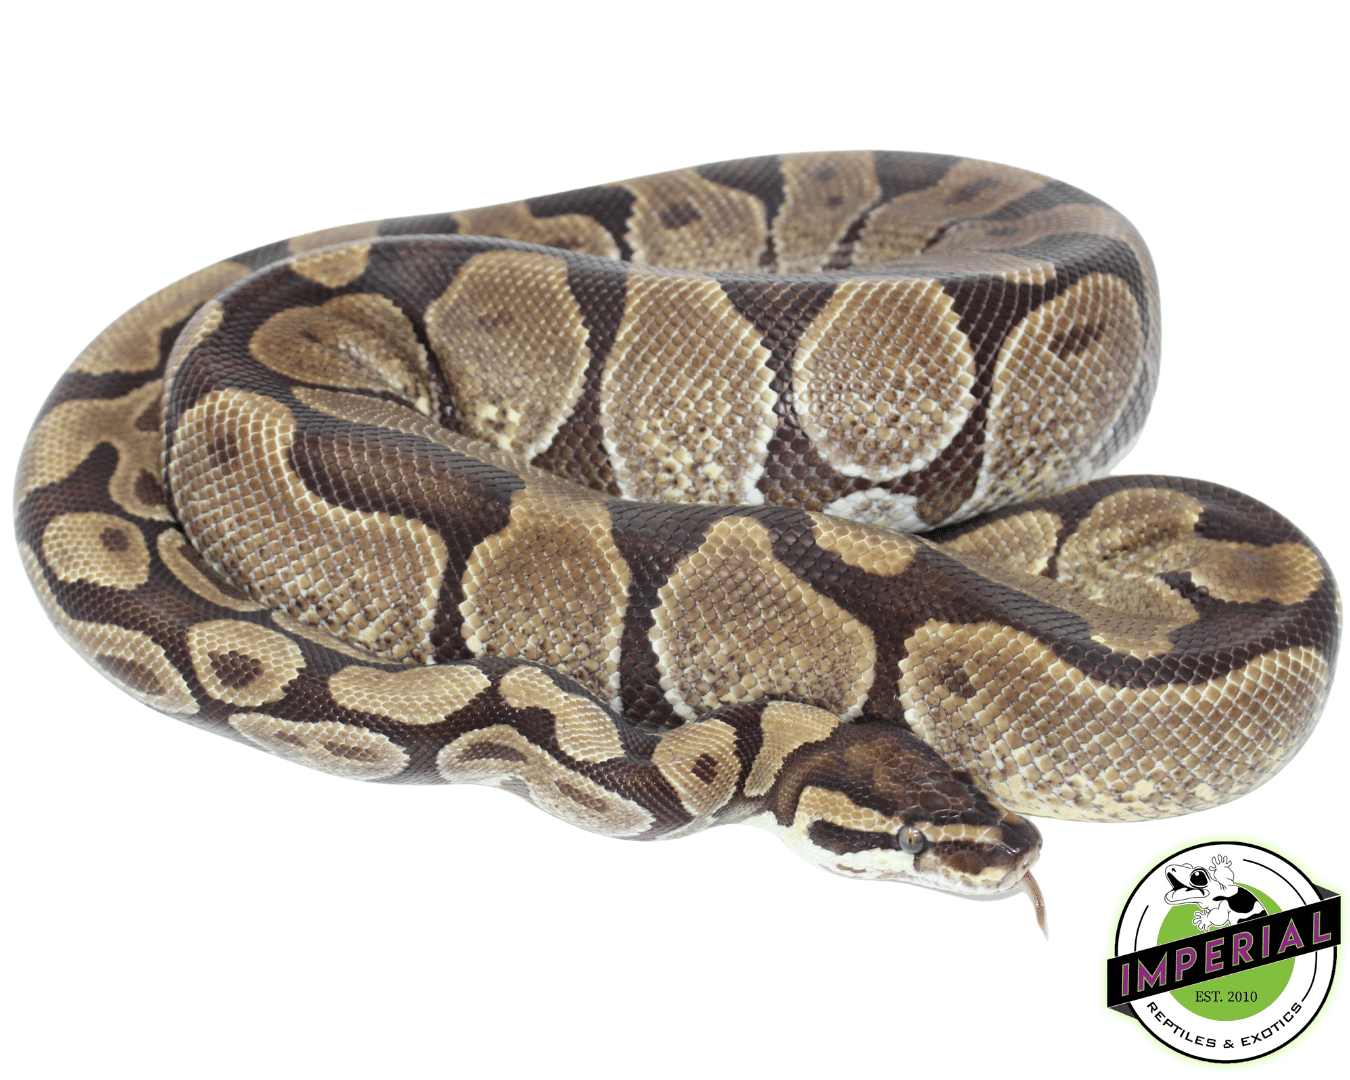 enchi ball python for sale, buy reptiles online